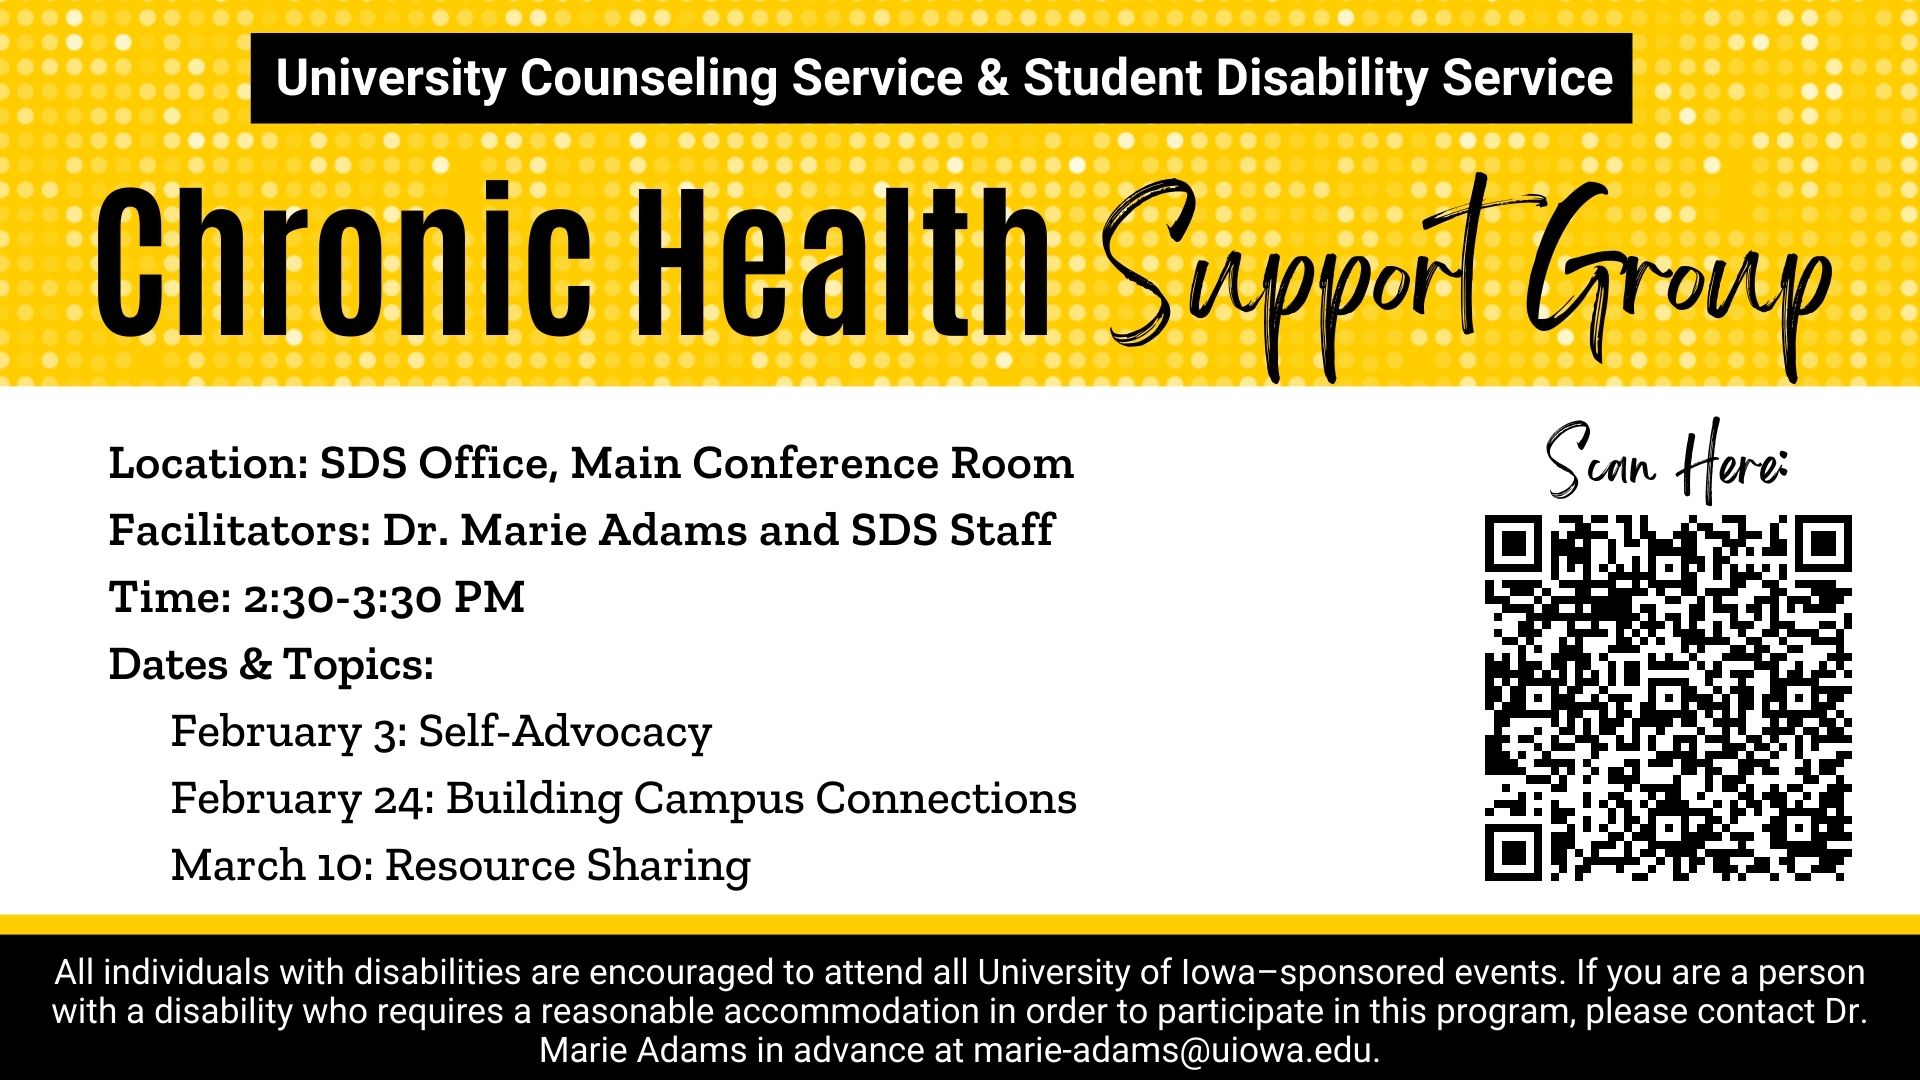  Location: SDS Office, Main Conference Room Facilitators: Dr. Marie Adams and SDS Staff Time: 2:30-3:30 PM Dates & Topics:       February 3: Self-Advocacy       February 24: Building Campus Connections        March 10: Resource Sharing